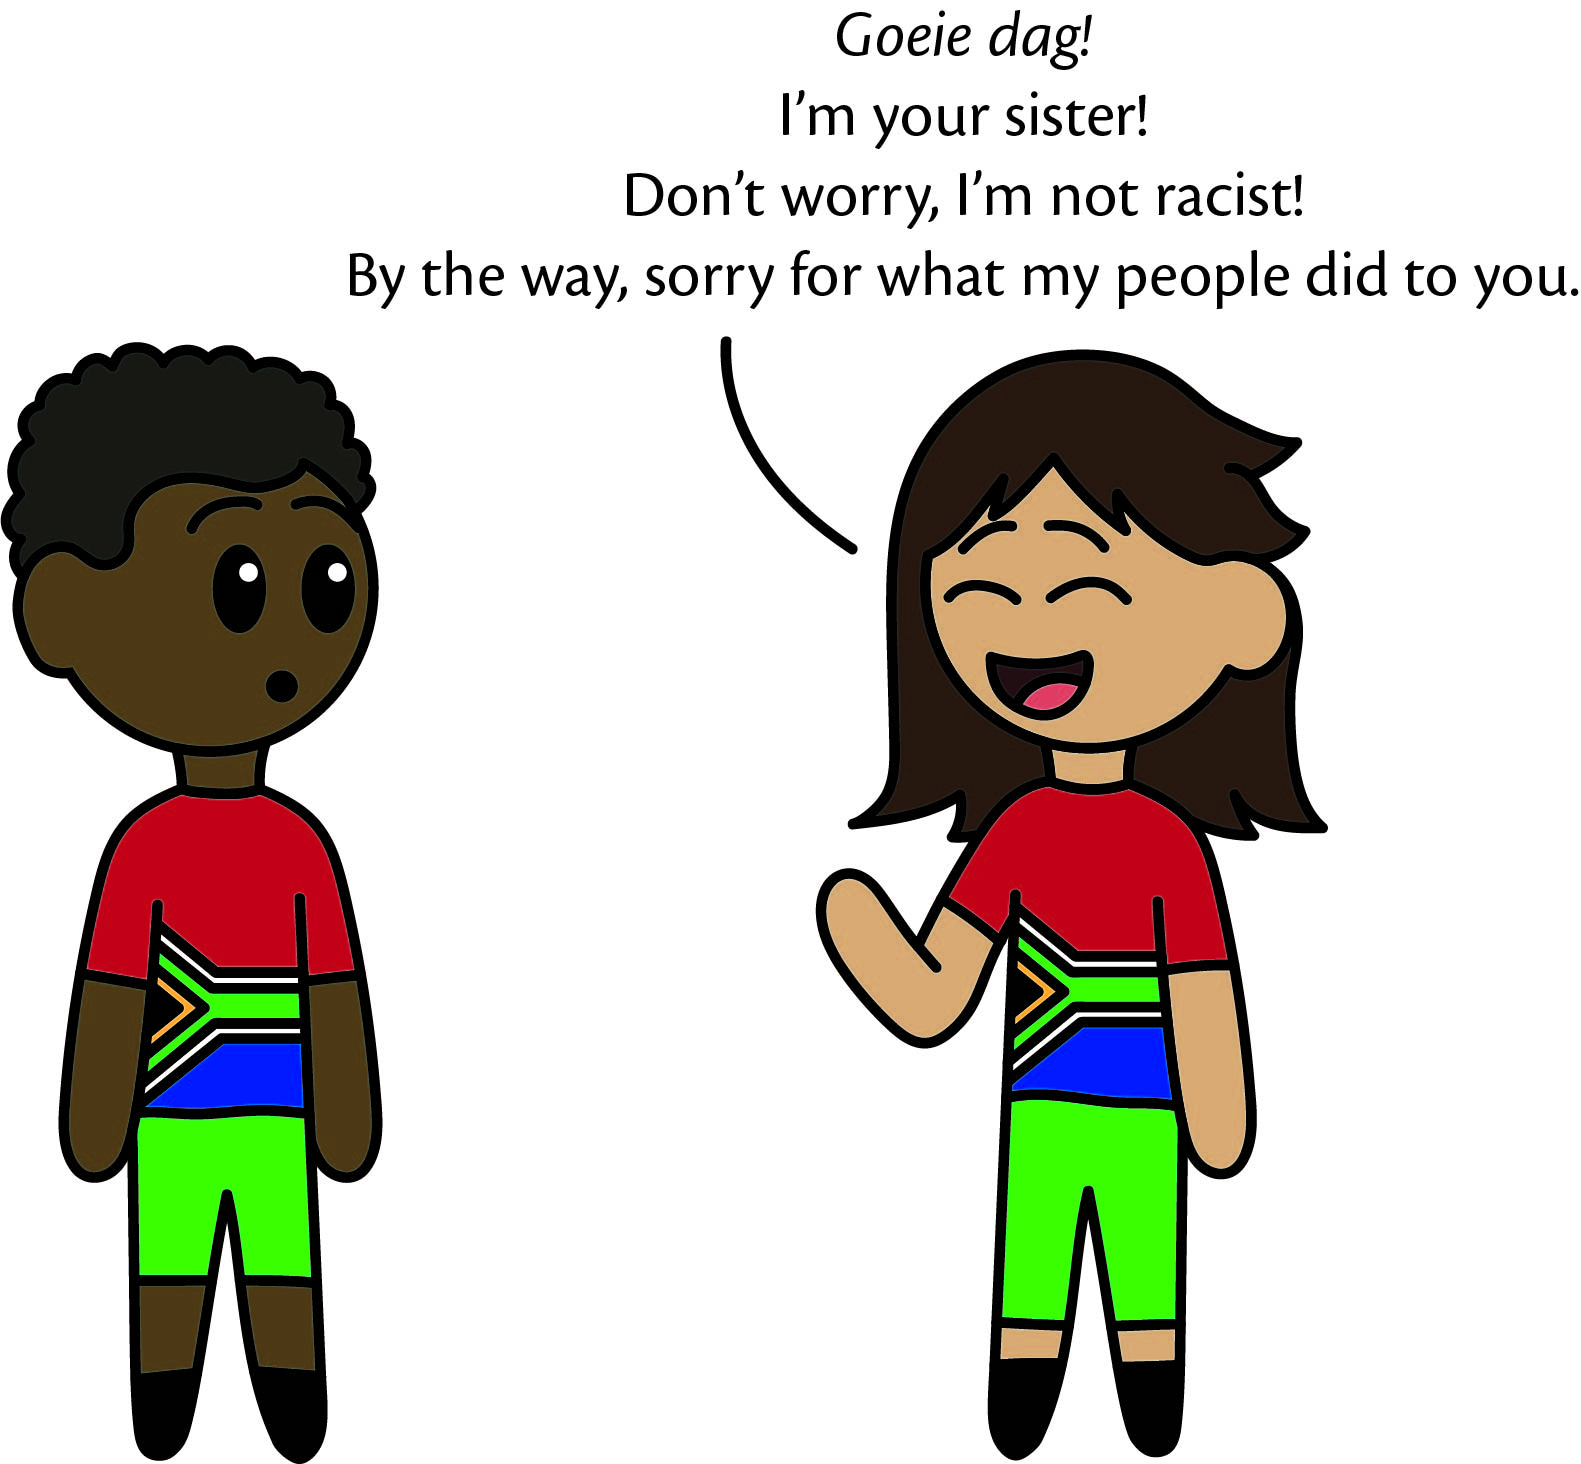 South Africa meets his sister satwcomic.com